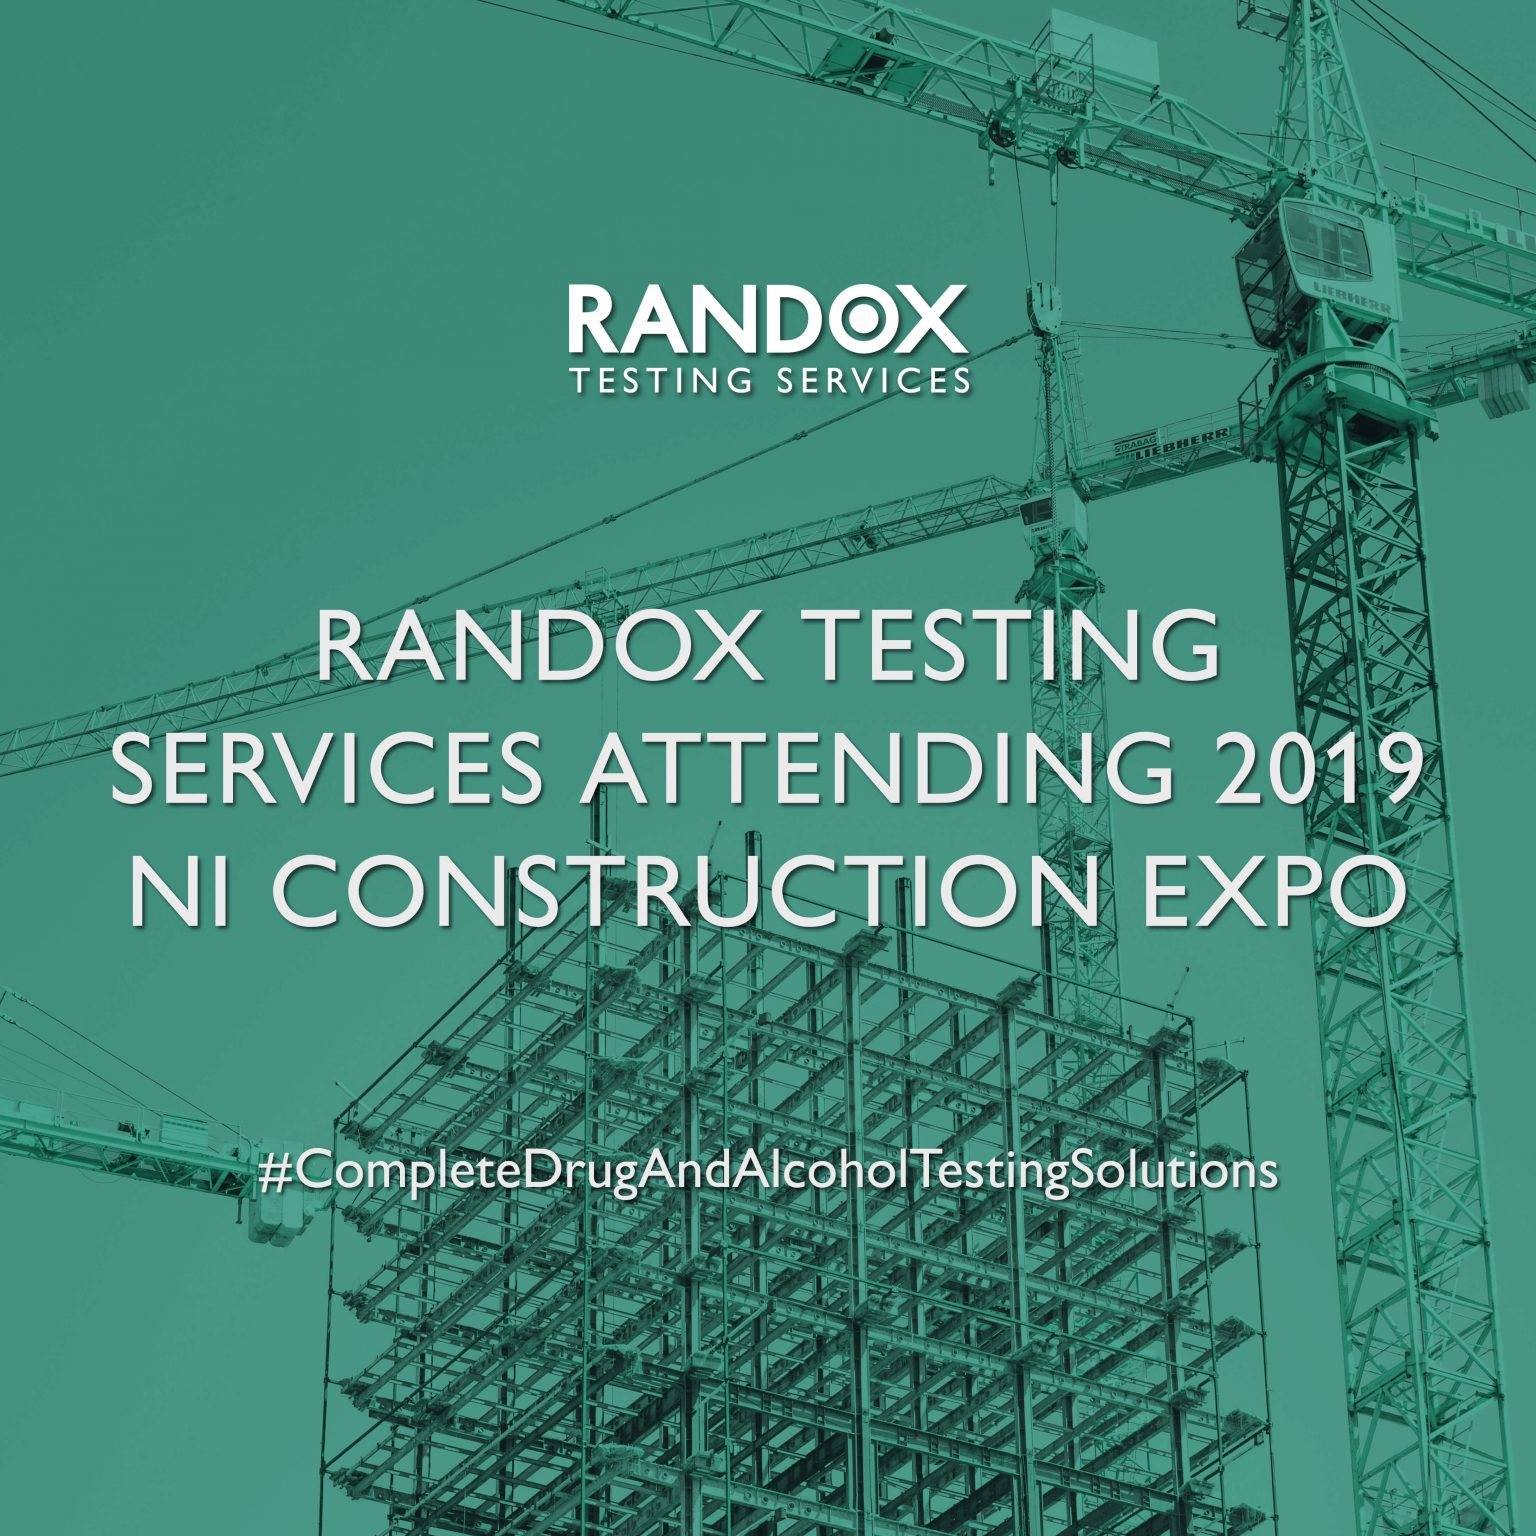 Randox Testing Services is attending the Northern Ireland Construction